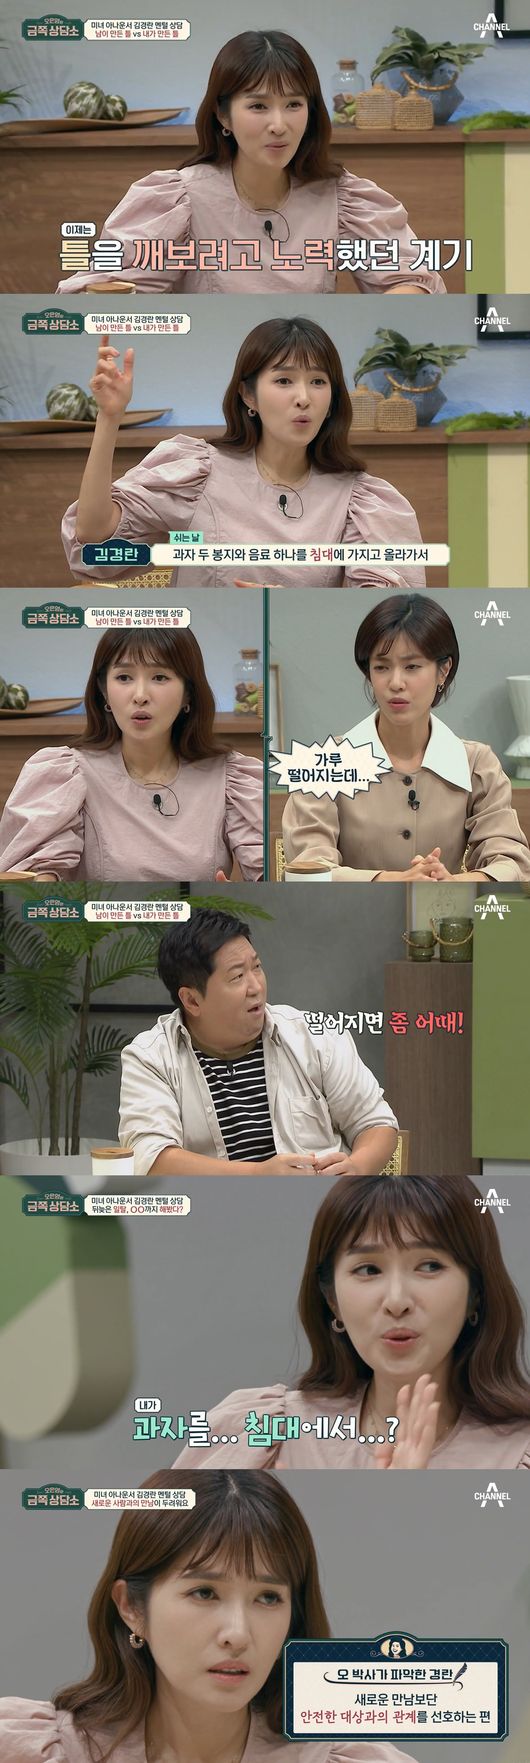 Kim Kyung-ran has been honest about his troubles.On the 5th, Channel A Oh Eun Youngs Golden Counseling Center attracted attention by mentioning the marriage with former Husband by Announcer Kim Kyung-ran as a guest.Kim Kyung-ran said, One of the stories I heard a lot in my life was that I was trapped in your frame. I left 10 years ago.Park Narae was surprised to say, I thought it was 10 years ago.Kim Kyung-ran said, I have a lot of poor sides and I fall over here and over there, and I have to be nervous when I work, so I think its imprinted.However, Kim Kyung-ran has excellent self-management, and no one has seen Kim Kyung-rans people at K headquarters, said Jin Young-don.Kim Kyung-ran said, I did not have to clean it because I had to do it again after two hours.Oh Eun Young also sympathized and said, If you are too tired, you will not erase your makeup and sometimes sleep.Kim Kyung-ran said: In fact I broke a lot of frames, I went into press notices and went into public bonds and left the company, I did a divorce.But I do not know why I keep breaking the frame, he said. Some people tell me to keep the image well so that it does not collapse.Someone else tells me to break the frame how long I will stay in the place. Oh Eun Young said, The frame has a frame that others have created and there is a frame that I adhere to. There is a frame that I think I should keep. Some people have important values ​​of life.Thats my frame, said Oh Eun Young, who then gave an example, My frame is not to drink unless its on vacation.Kim Kyung-ran said of his frame: Its about eating Pilates twice a week, two other exercises, breakfast all the time.Even if you drink the other day, you eat sandwiches for breakfast. Kim Kyung-ran said, For me, bed is not a space other than sleeping. Lee Yoon-ji said, I am too. I said that I had never seen a mother who had a baby and did not lie in bed.Kim Kyung-ran said, I do not know how I like it. My father always said that I should meet a man who likes me.I gave a lot of added points to someone who liked me because of the experience of being bullied when I was a child or the experience of rejecting me. Kim Kyung-ran said: I thought I might have liked him after I broke up with someone, I didnt like him much, but I think I had dated him.I thought I would have loved or not know that I was soaking in love. So, Jin Young-don asked, Is not it marriage because I love you?Kim Kyung-ran said, I thought that it might not be a marriage that I knew and proceeded with my mind. It was important that my opponent loved me.I do not know what I should believe in how I love this person. Kim Kyung-ran said, The article was just up and quickly decided to marriage and progressed. Every time I met someone, the article was caught.I felt the burden of getting into a bad job because my job was like this. Oh Eun Young asked, Have you ever had emotional sympathy or emotional understanding while living marriage?I think that part was the worst, Kim Kyung-ran said, but I tried hard to understand, but I couldnt, I dont think I knew too much about my feelings.I do not know my feelings so much that I did not know enough to apologize to myself. Oh Eun Young said, Mr. Kyung-Ran is not a style that hurts others by expressing emotions. If Mr. Kyung-Ran is angry, it will be angry.I think I need to practice thinking about my feelings. Kim Kyung-ran said: I kept asking people if I was hard, I dont believe my feelings.I think I thought that I was going in the wrong direction because I was so short of the decision I made. Oh Eun Young said, There is no wrong mind. The mind is just the mind. You do not have to ask if it is right.